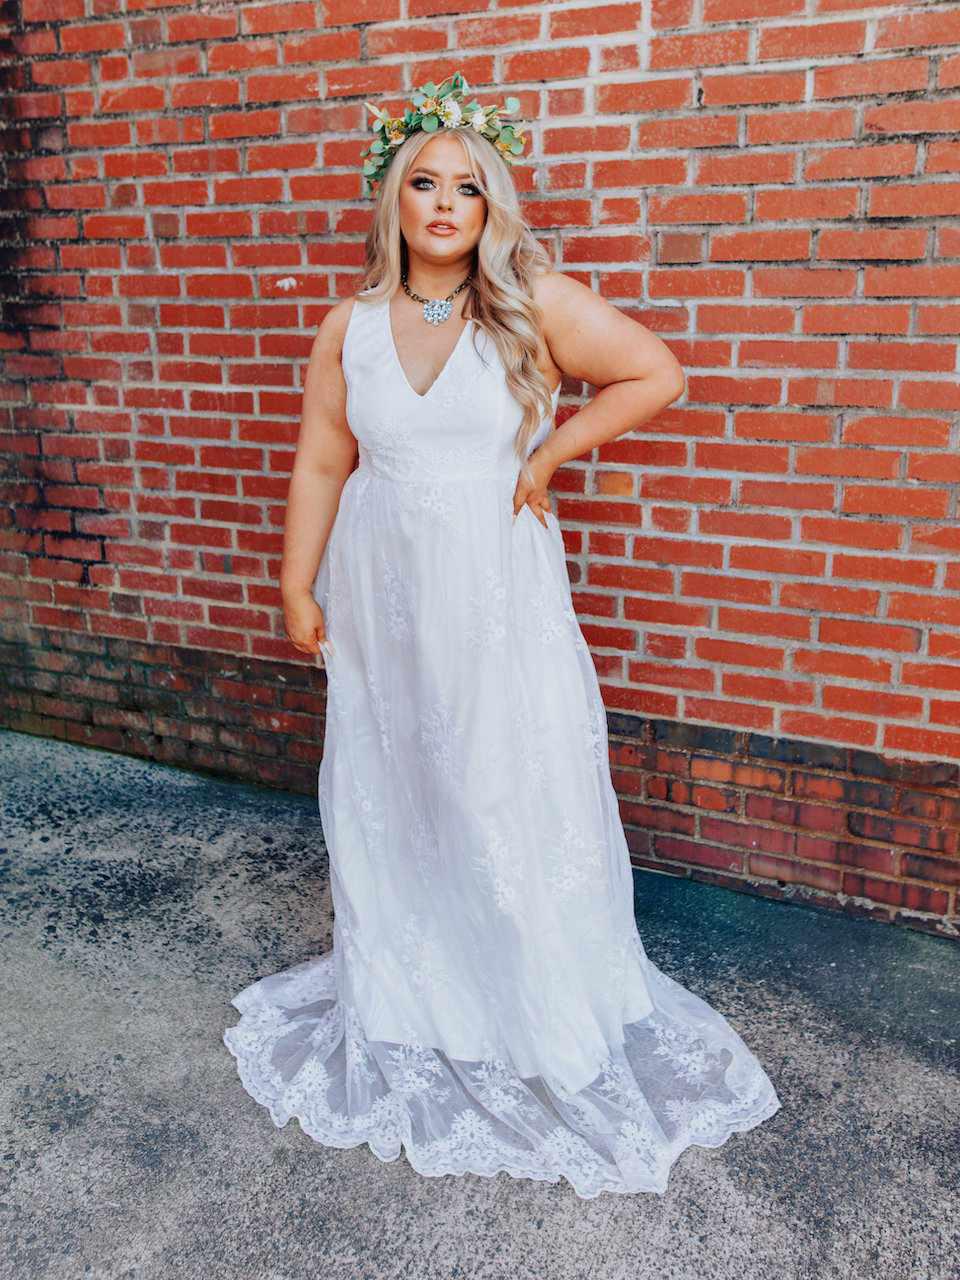 Loved Her First Dress-Dresses-Southern Fried Chics